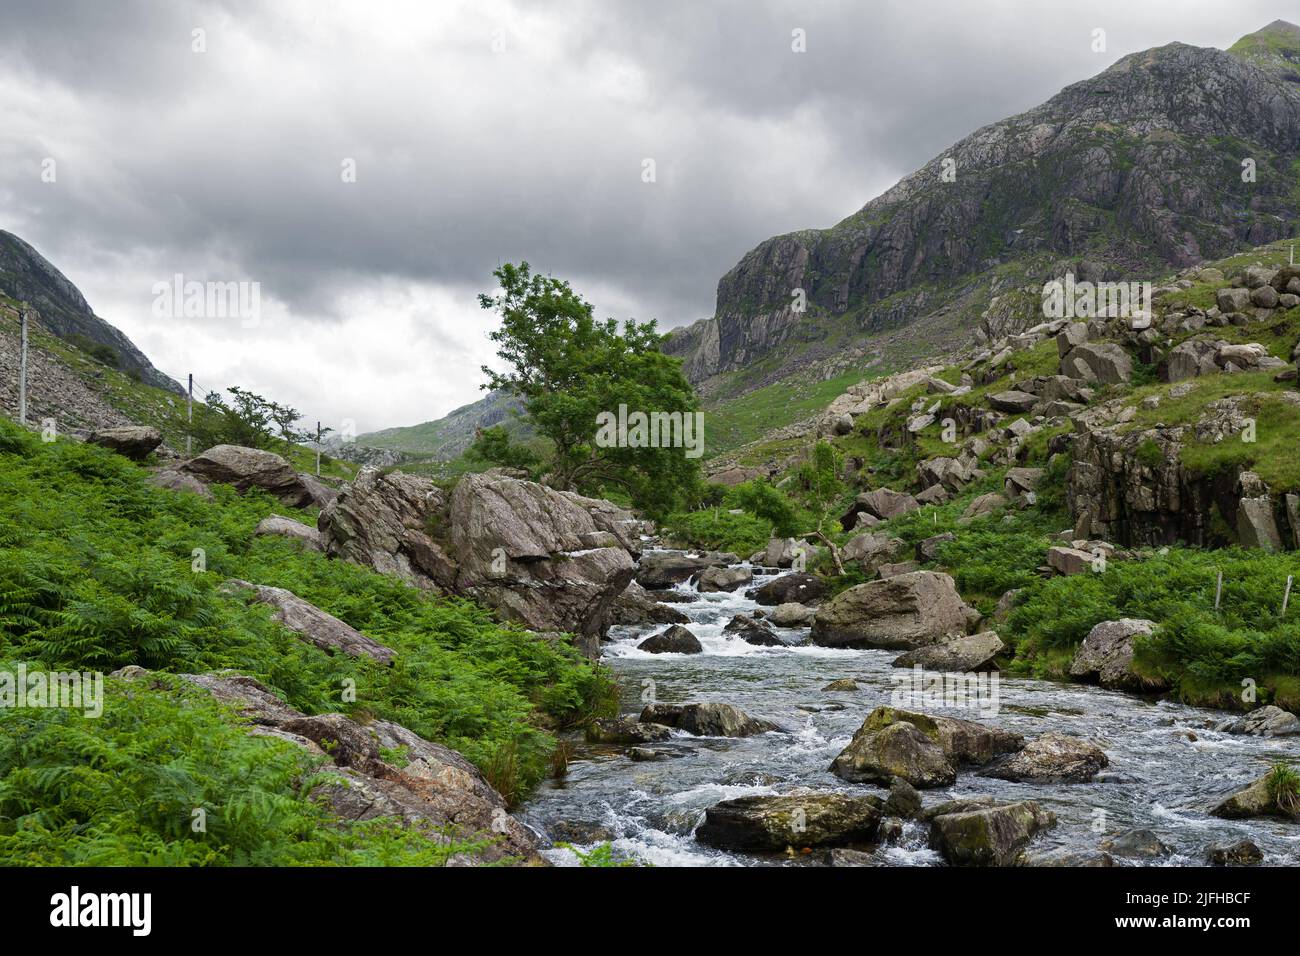 Afon Nant Peris is a river flowing through the Llanberis Pass in Snowdonia, Wales between the Glyderau and Snowdon massifs. Stock Photo